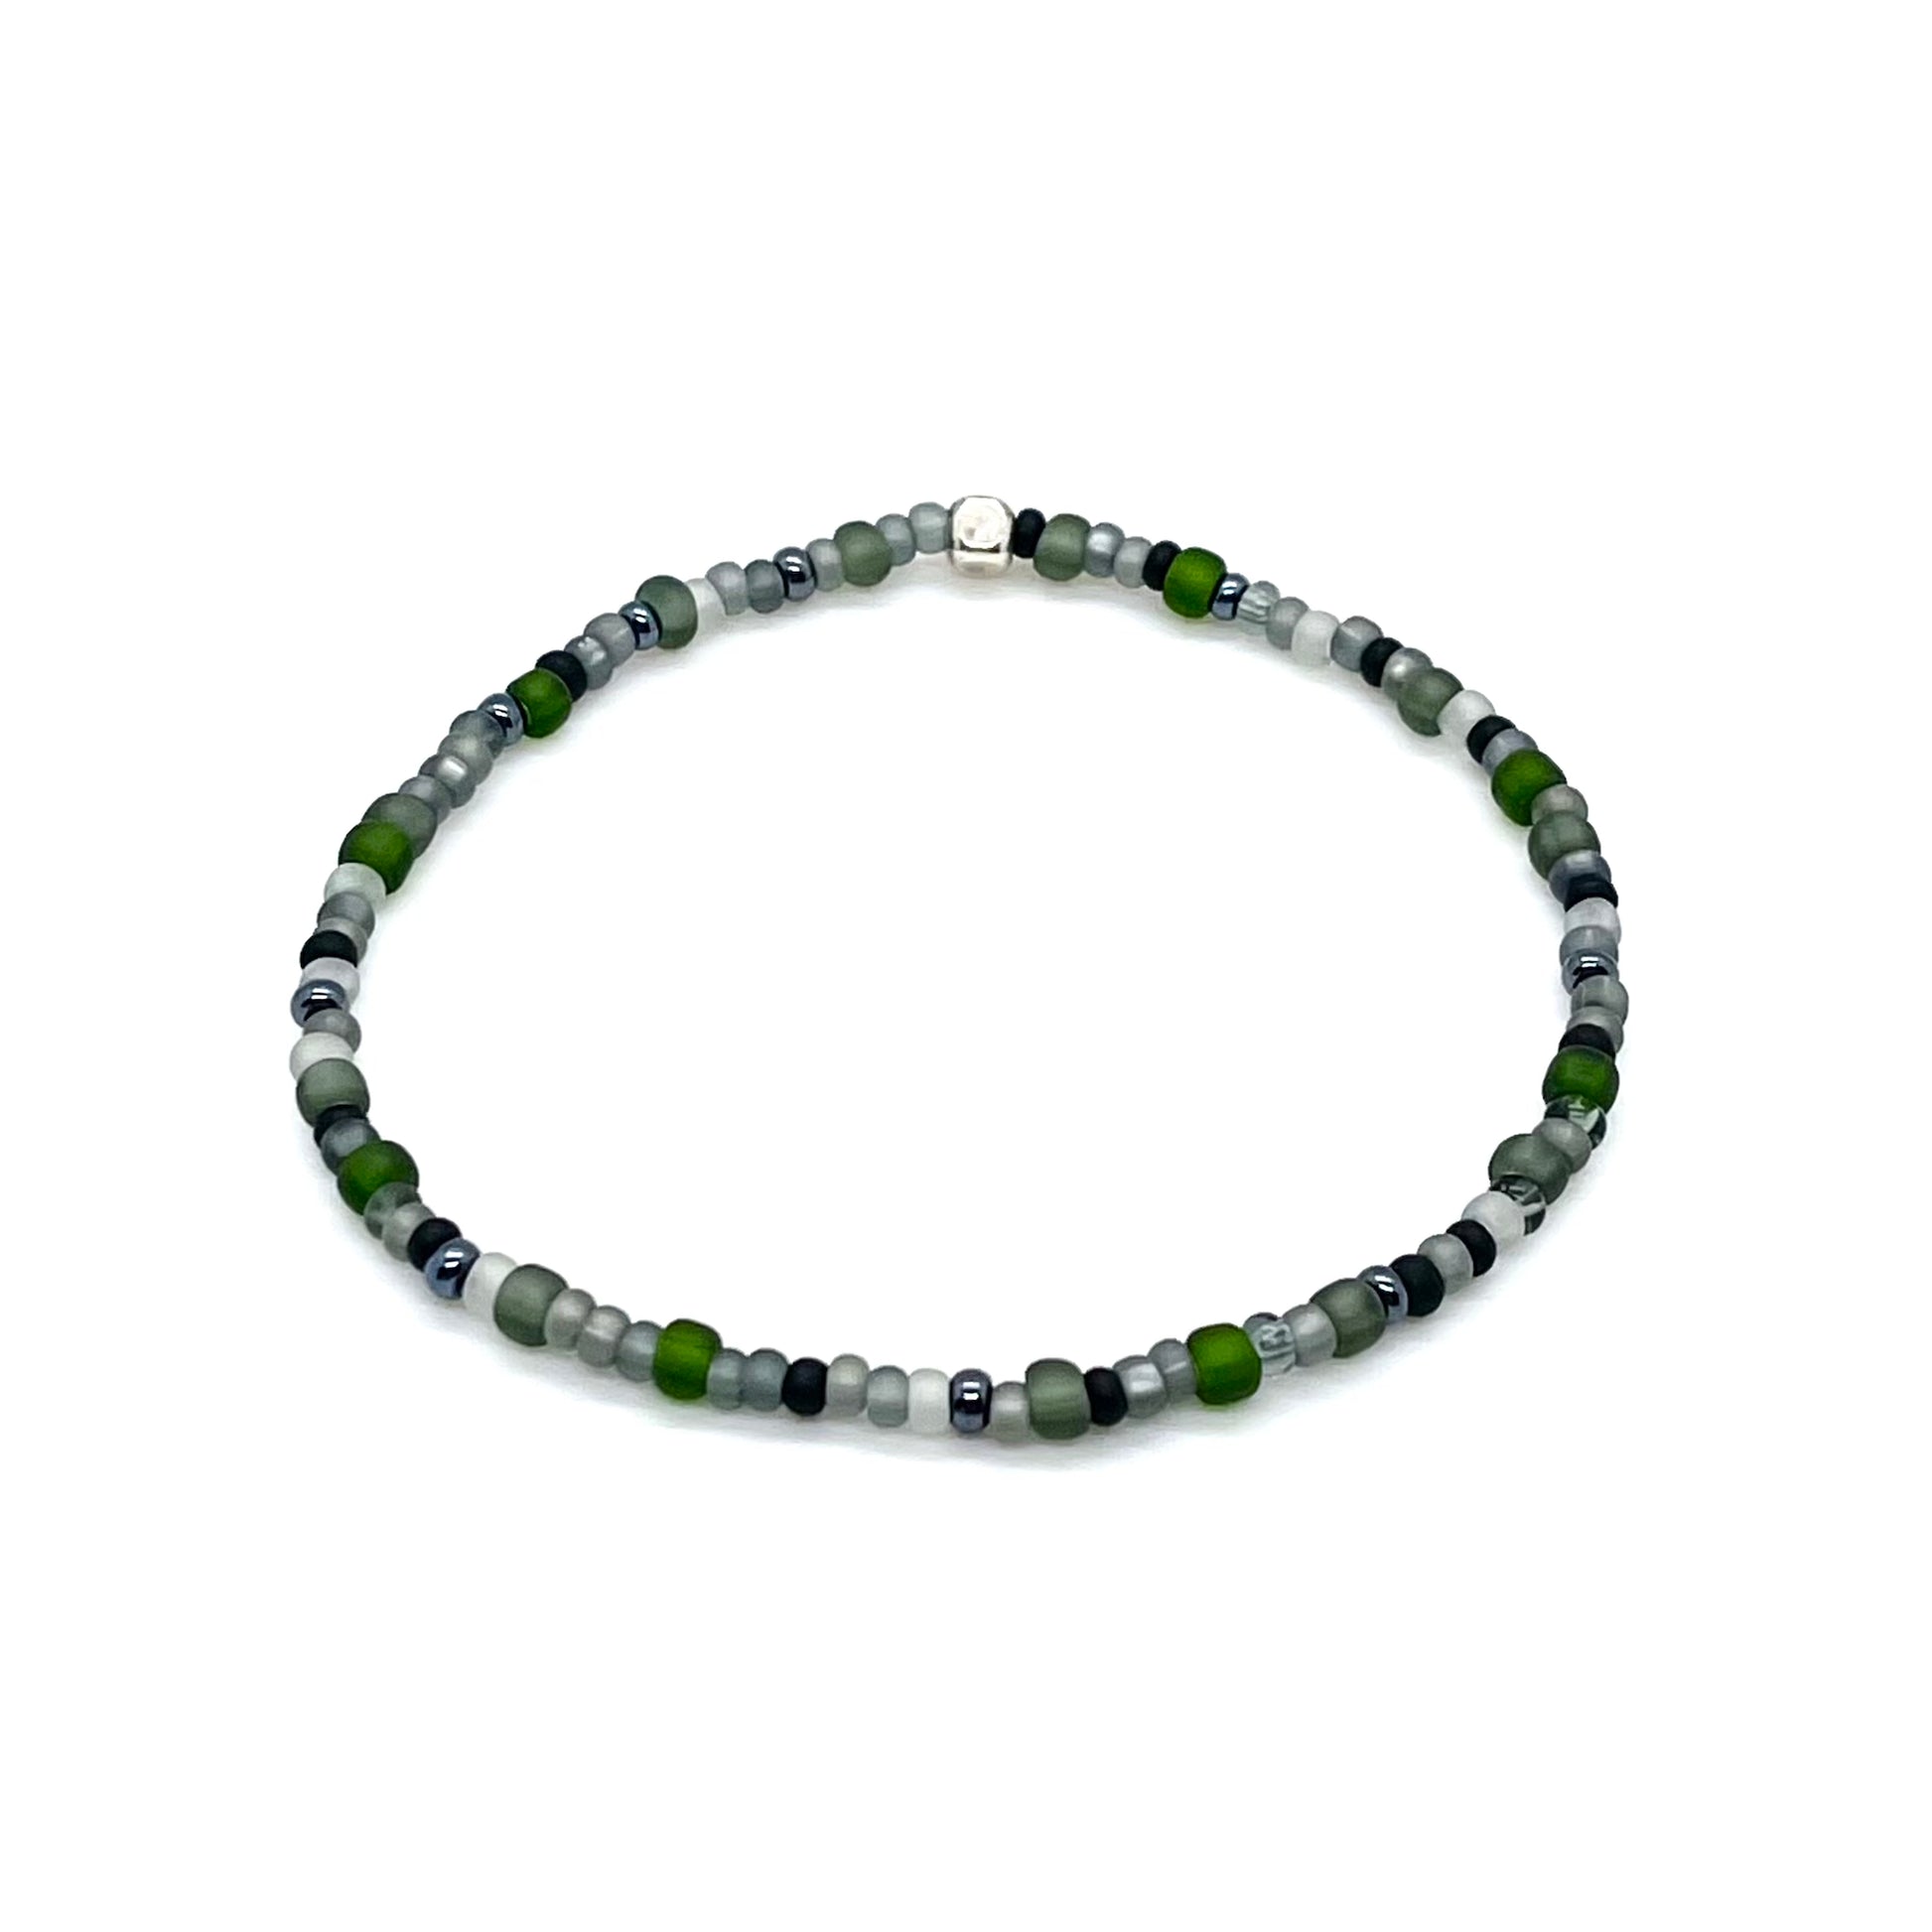 Men's thin bracelet with green and gray seed beads on elastic stretch cord.